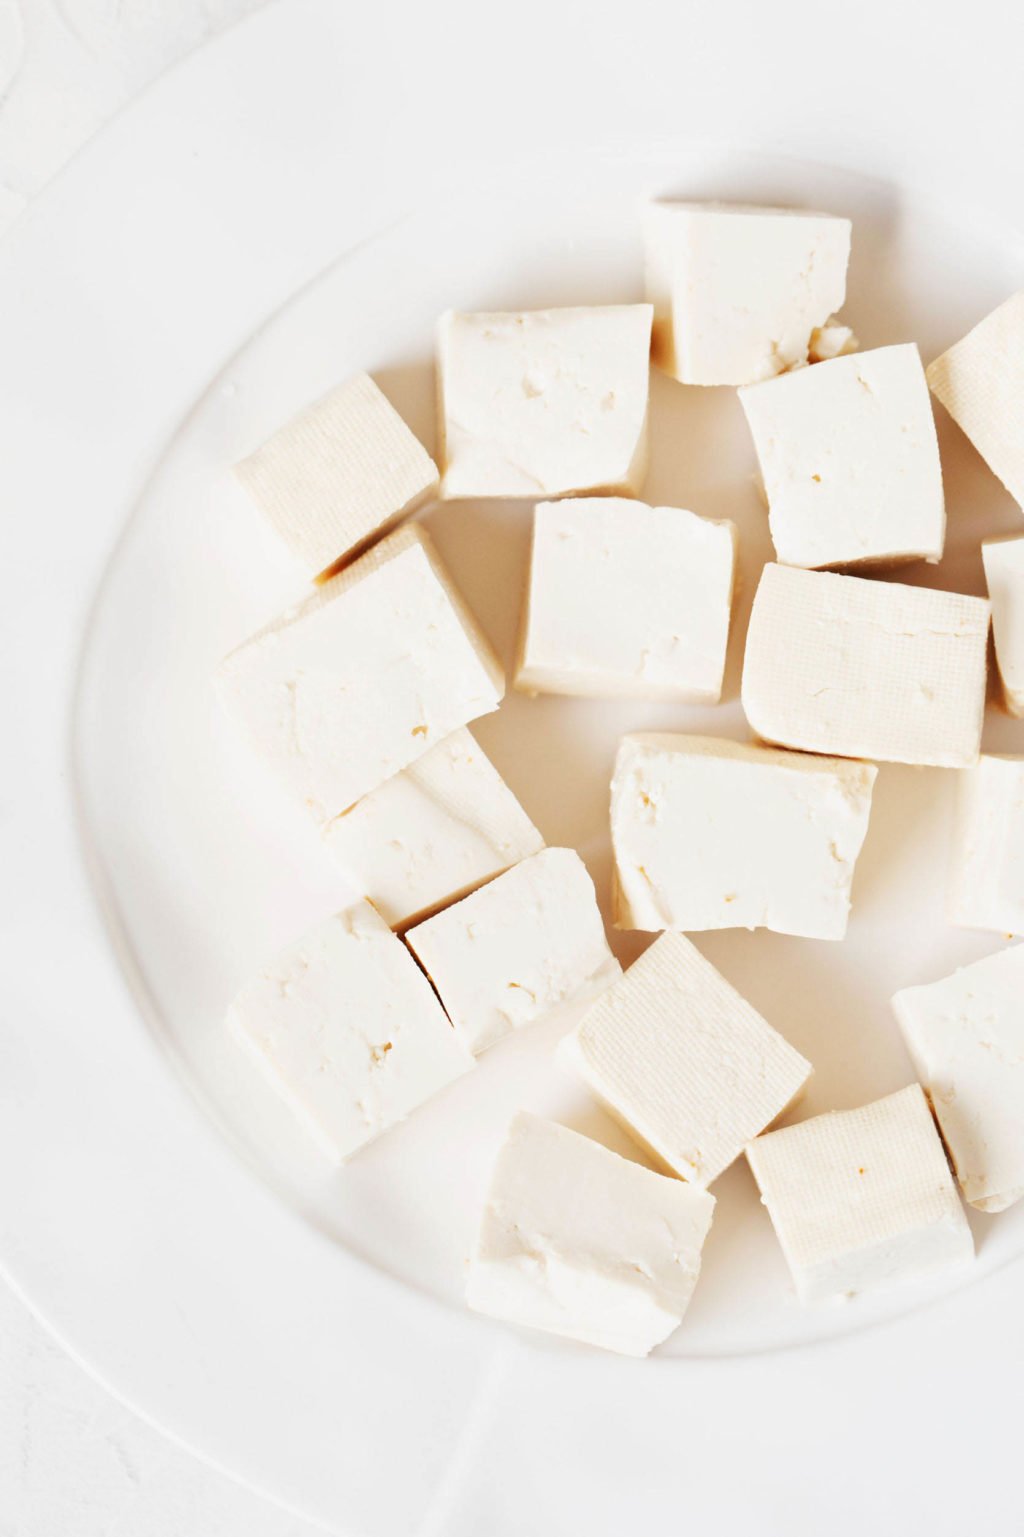 Cubed, plain tofu is resting on a white plate. The plate is on a white surface.